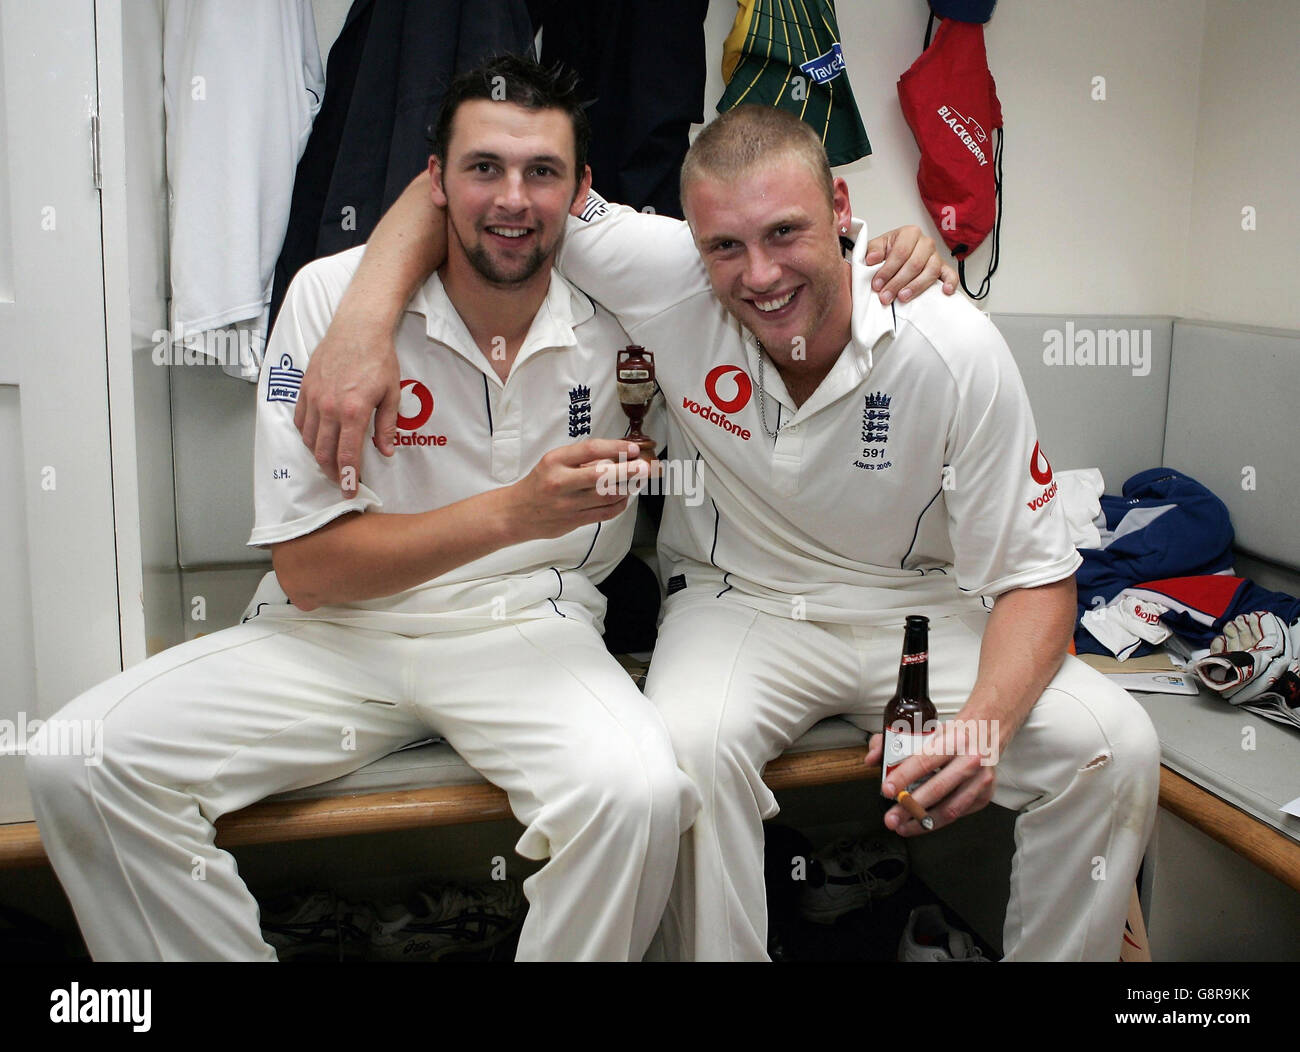 England's Steve Harmison (L) and Andrew Flintoff celebrate with the Ashes urn in the changing room after winning the Ashes on the final day of the fifth npower Test match against Australia at the Brit Oval, London, Monday September 12, 2005. England regained the Ashes after drawing the final Test match and winning the series 2-1. PRESS ASSOCIATION Photo. Photo credit should read: Tom Shaw/Getty Images/PA/POOL Stock Photo